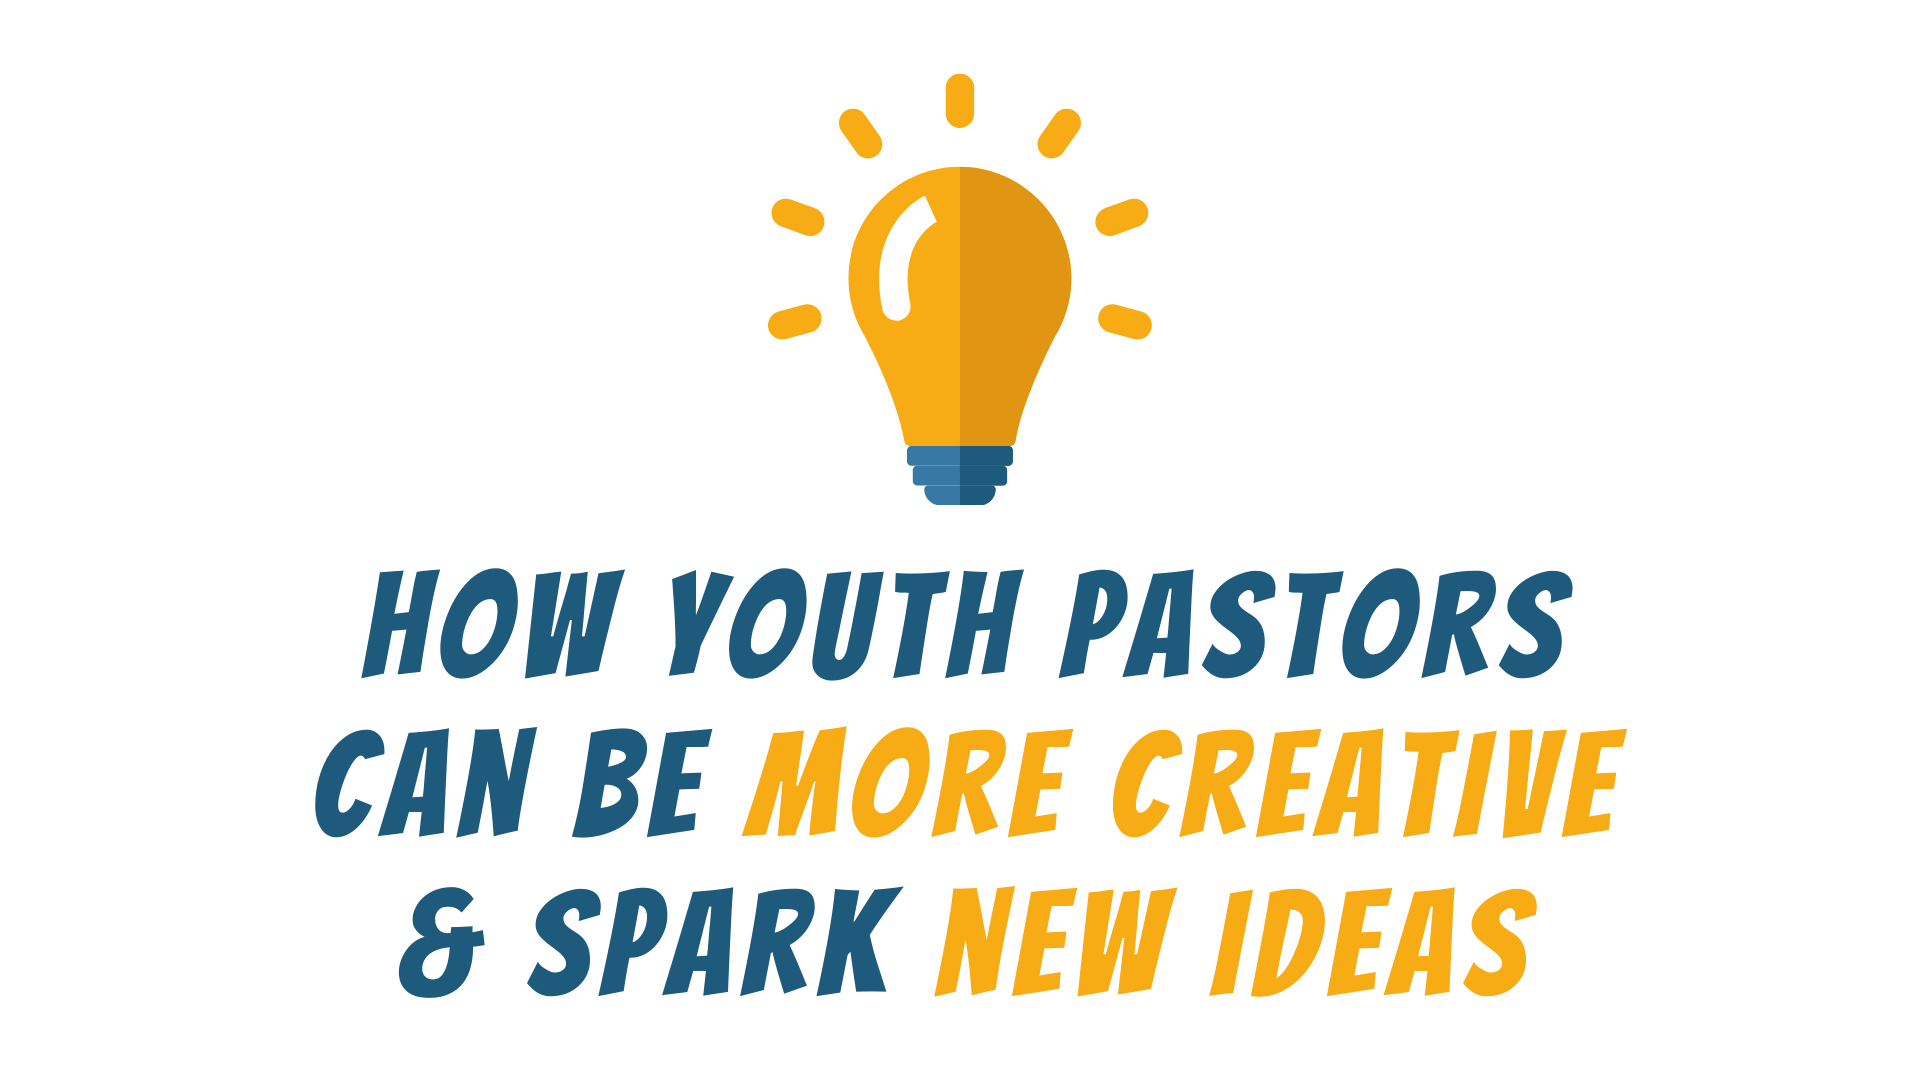 How Youth Pastors Can Be More Creative and Spark New Ideas in Youth Ministry